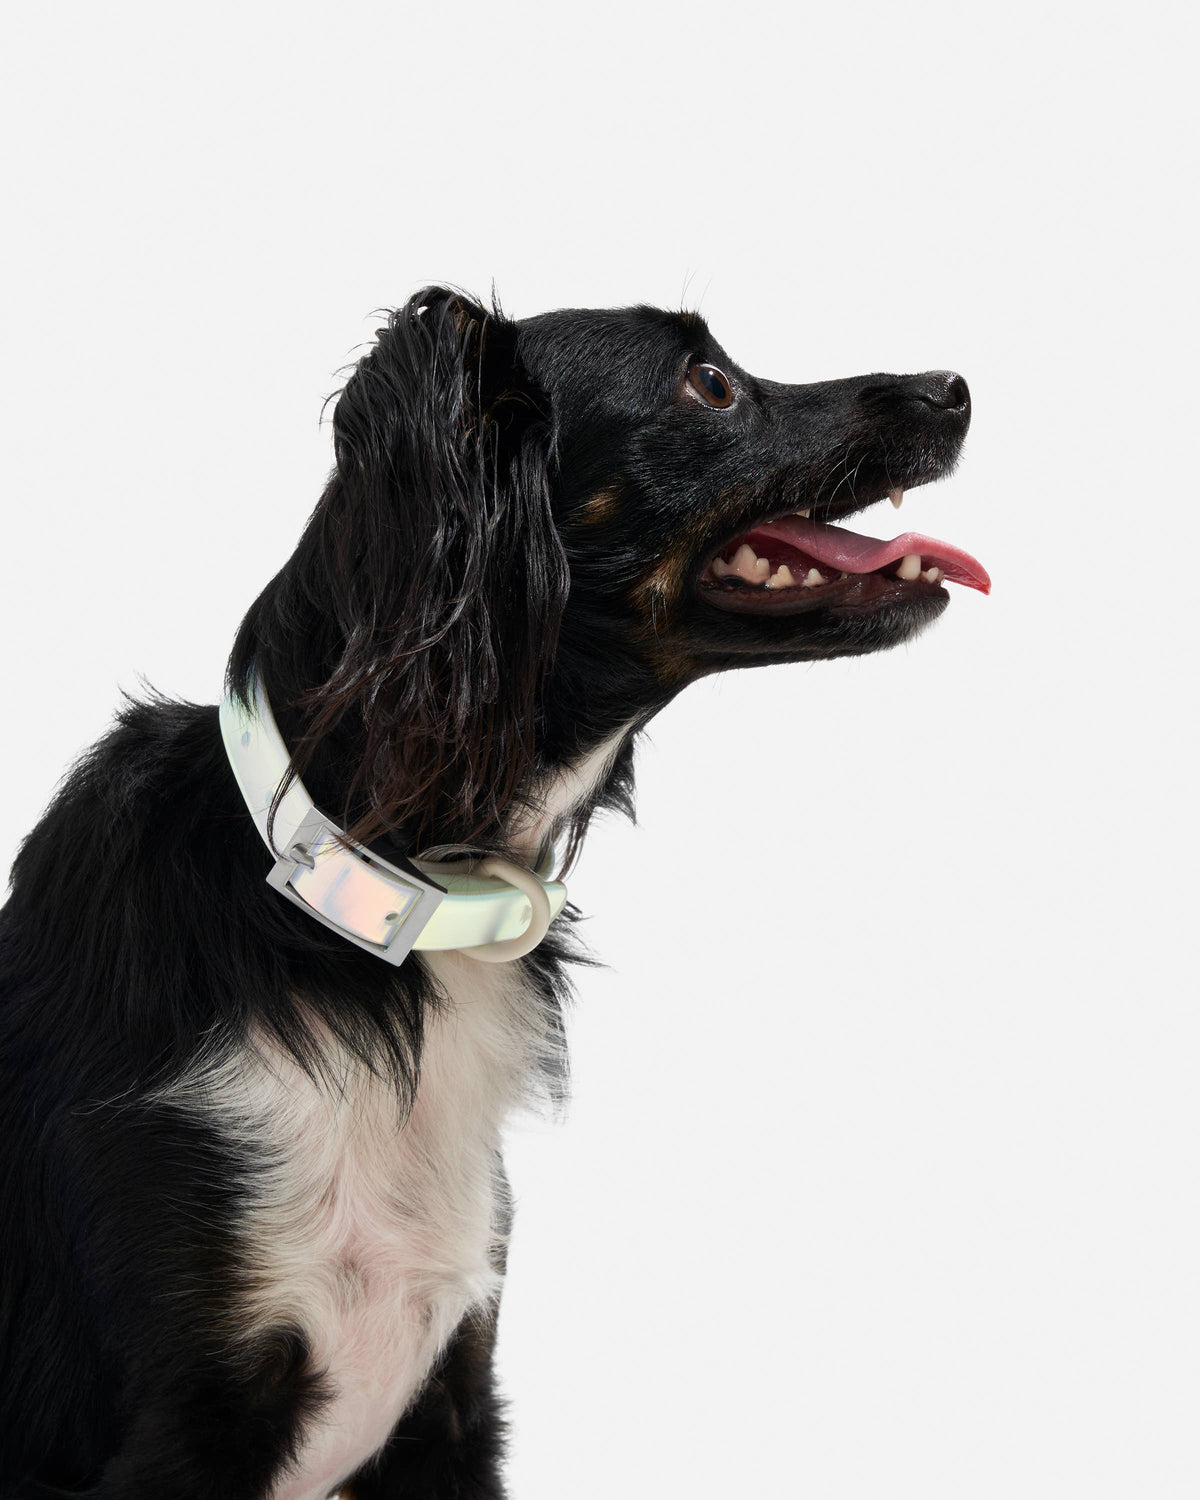 Dog Collar - Holographic Lunar NEW!: SMALL / Holographic Lunar